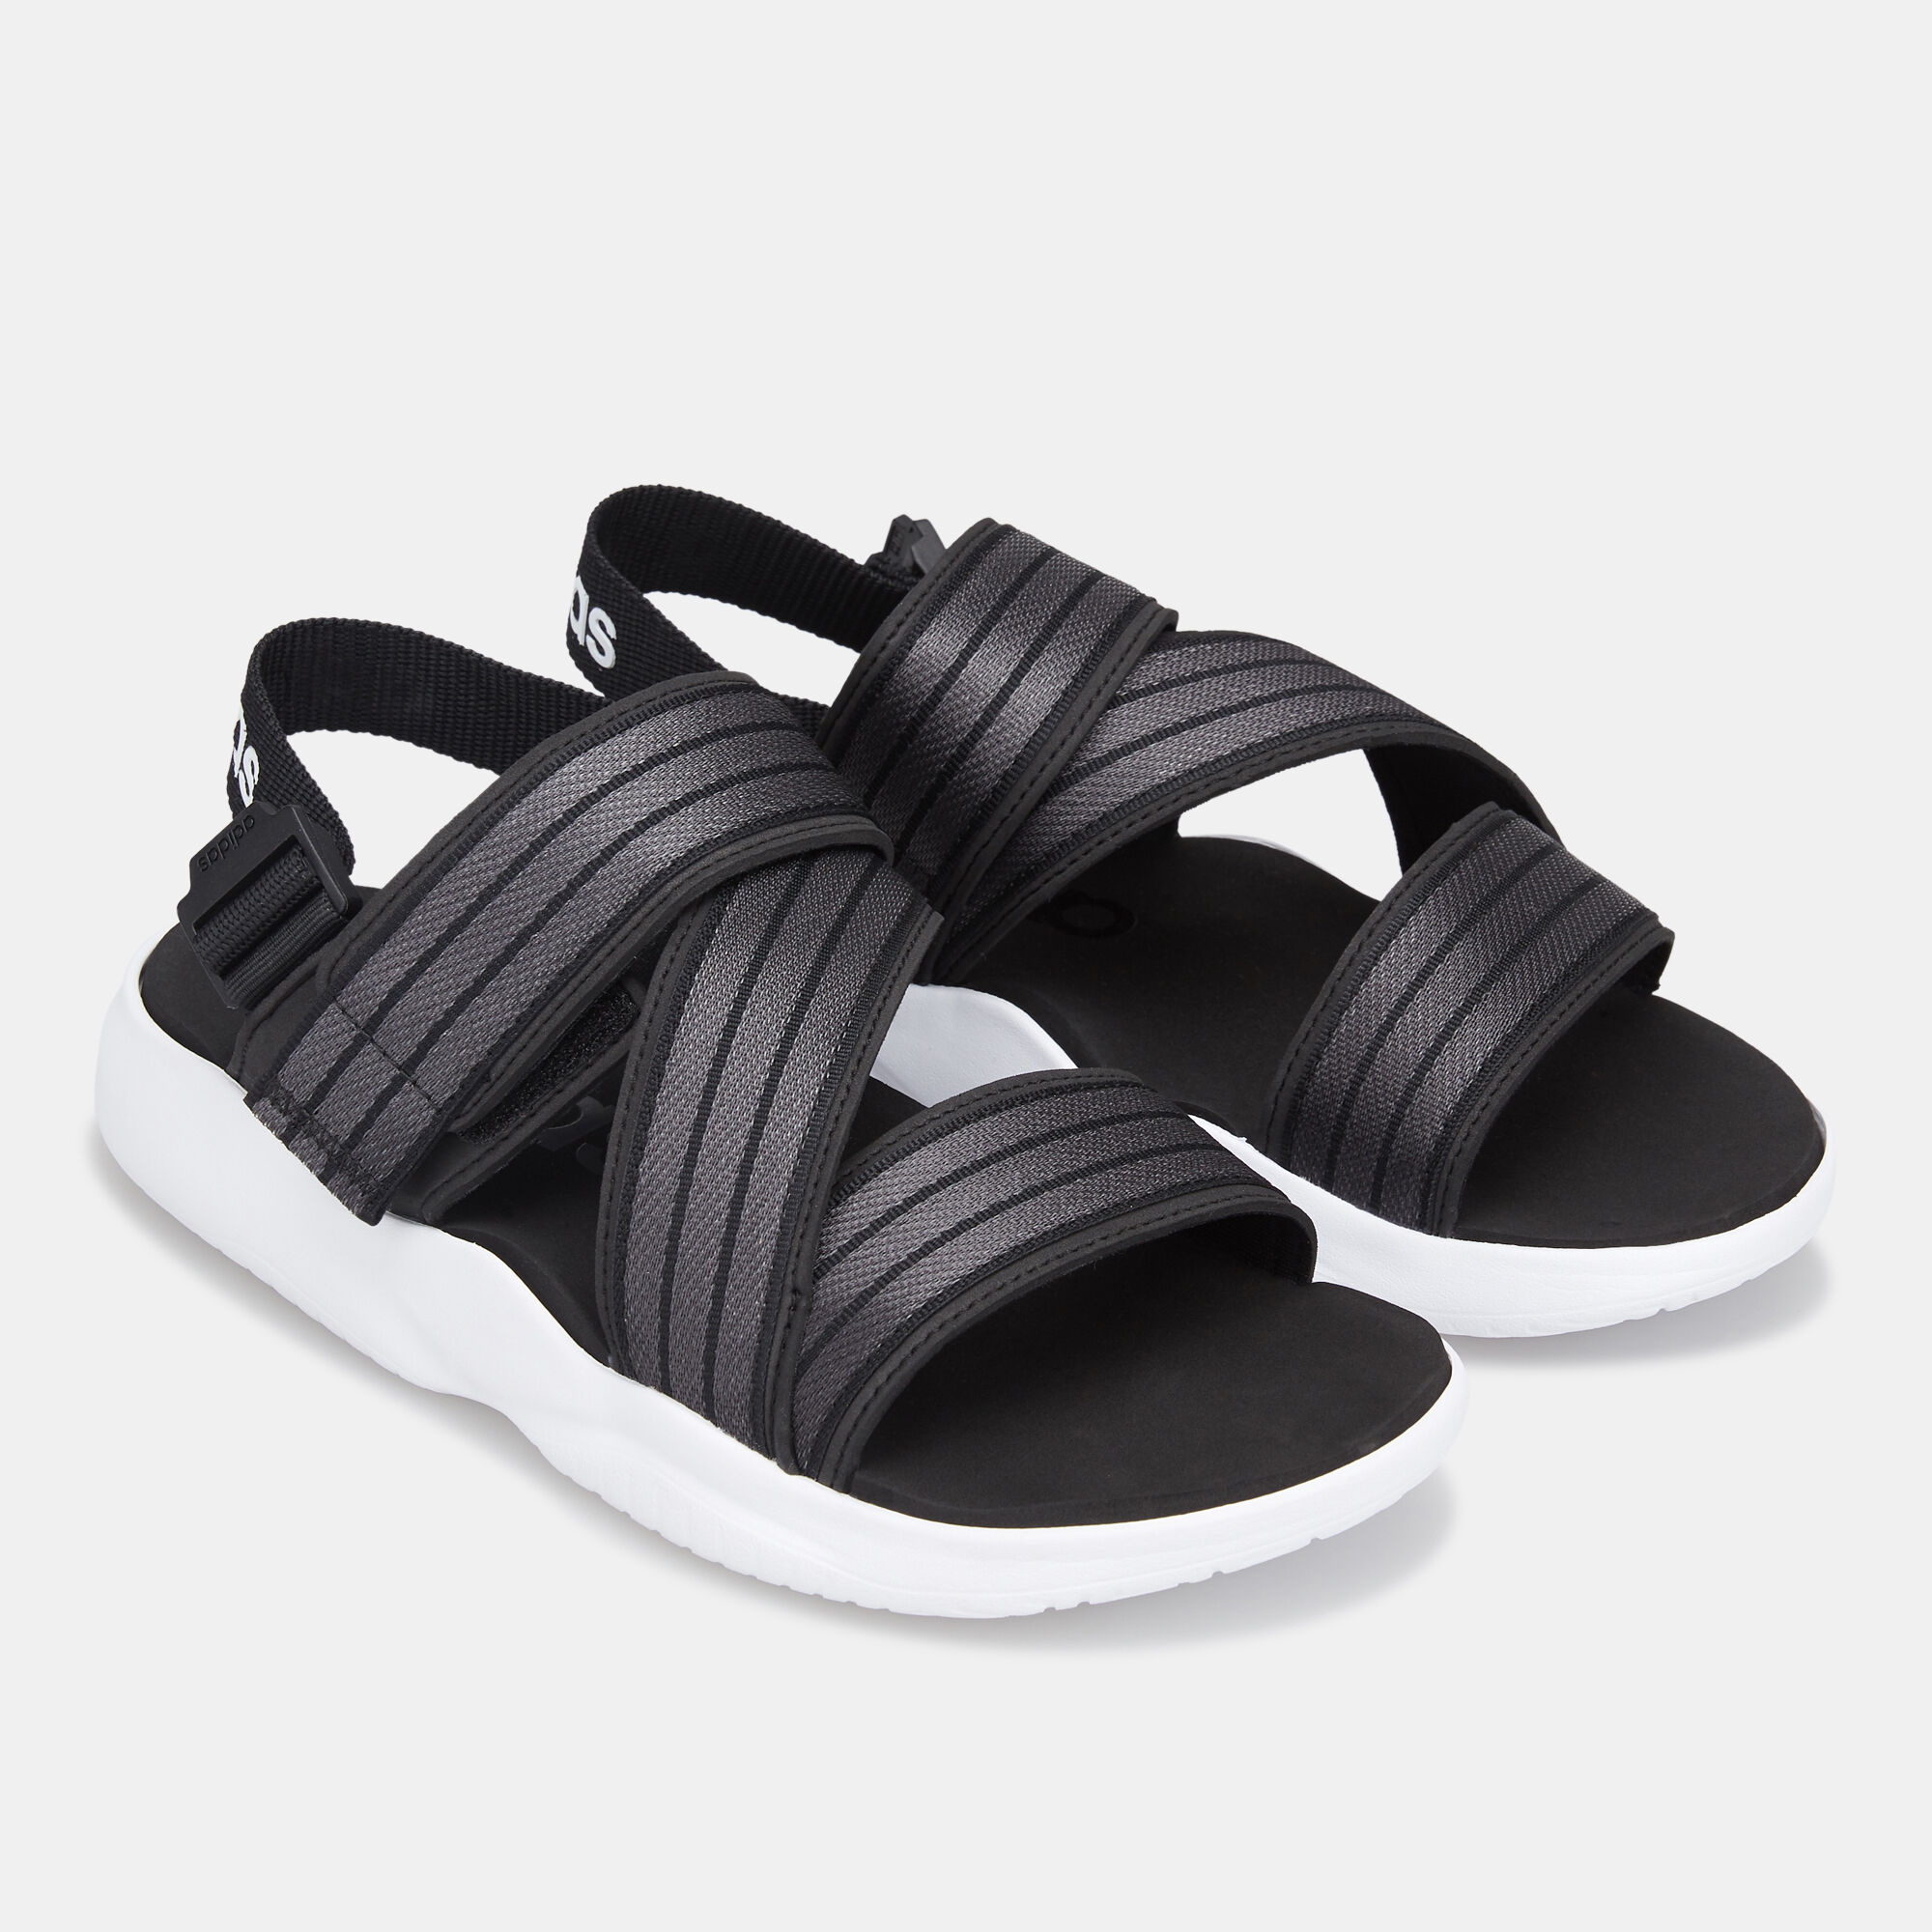 ADIDAS ADILETTE Velcro sandals adidas sandals for women and men adidas  sandals 0CAy | Shopee Philippines